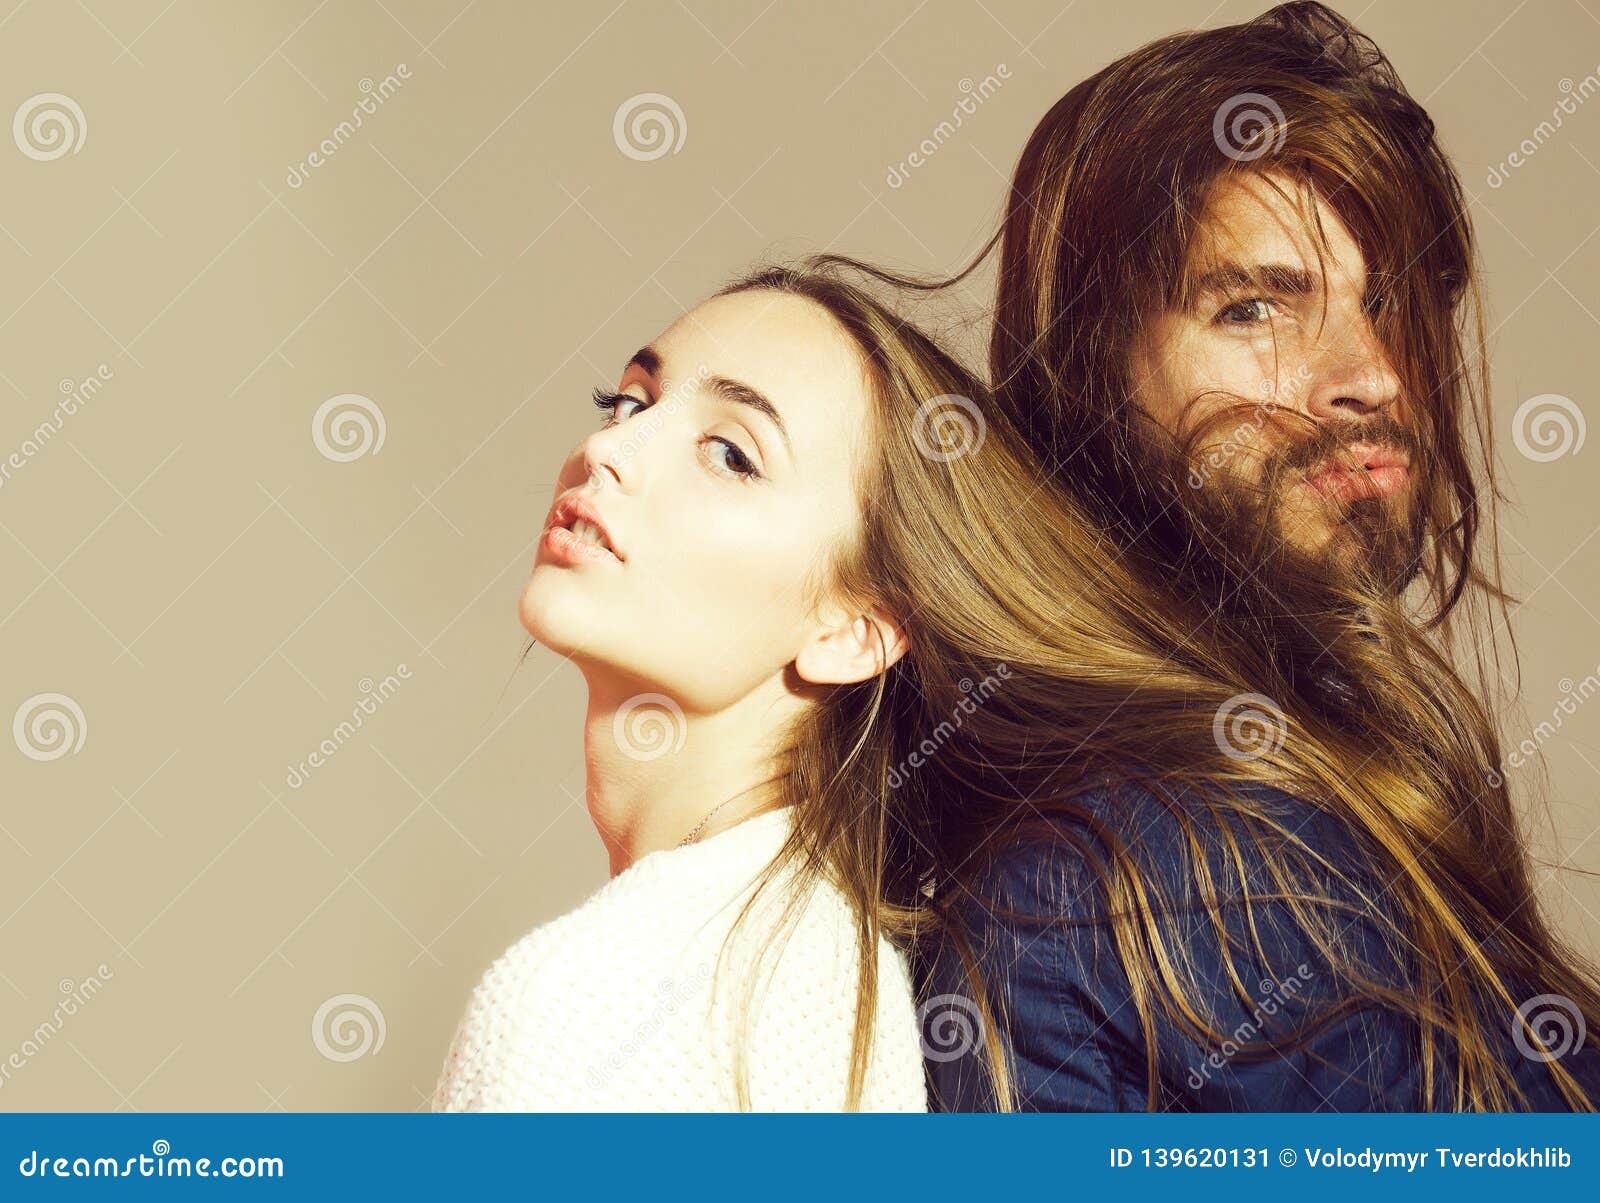 Young Couple with Messy Hair Stock Image - Image of cute, adults: 139620131